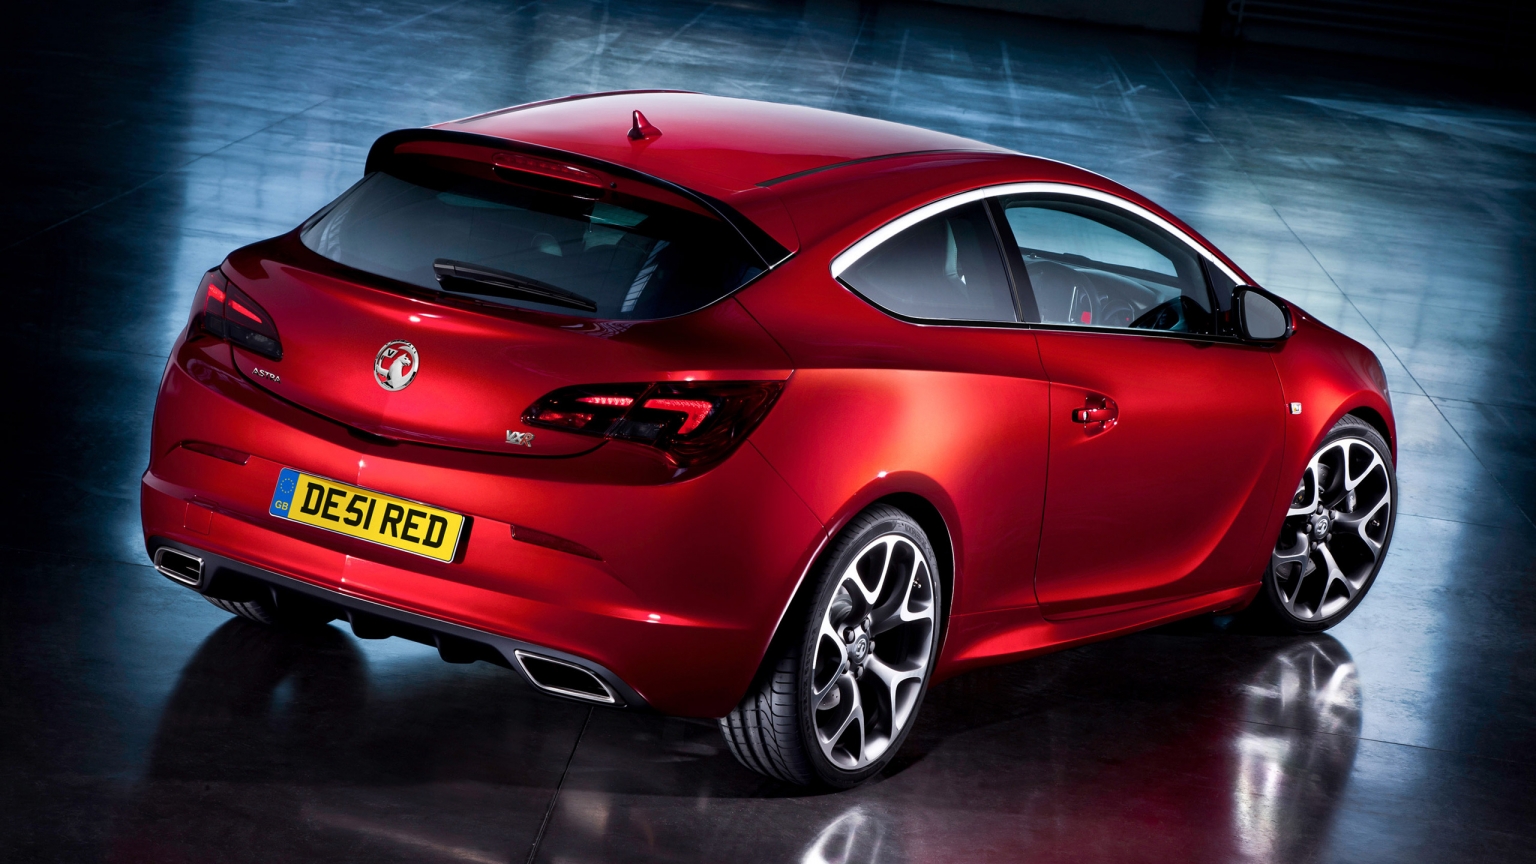 Vauxhall Astra GTC Rear for 1536 x 864 HDTV resolution